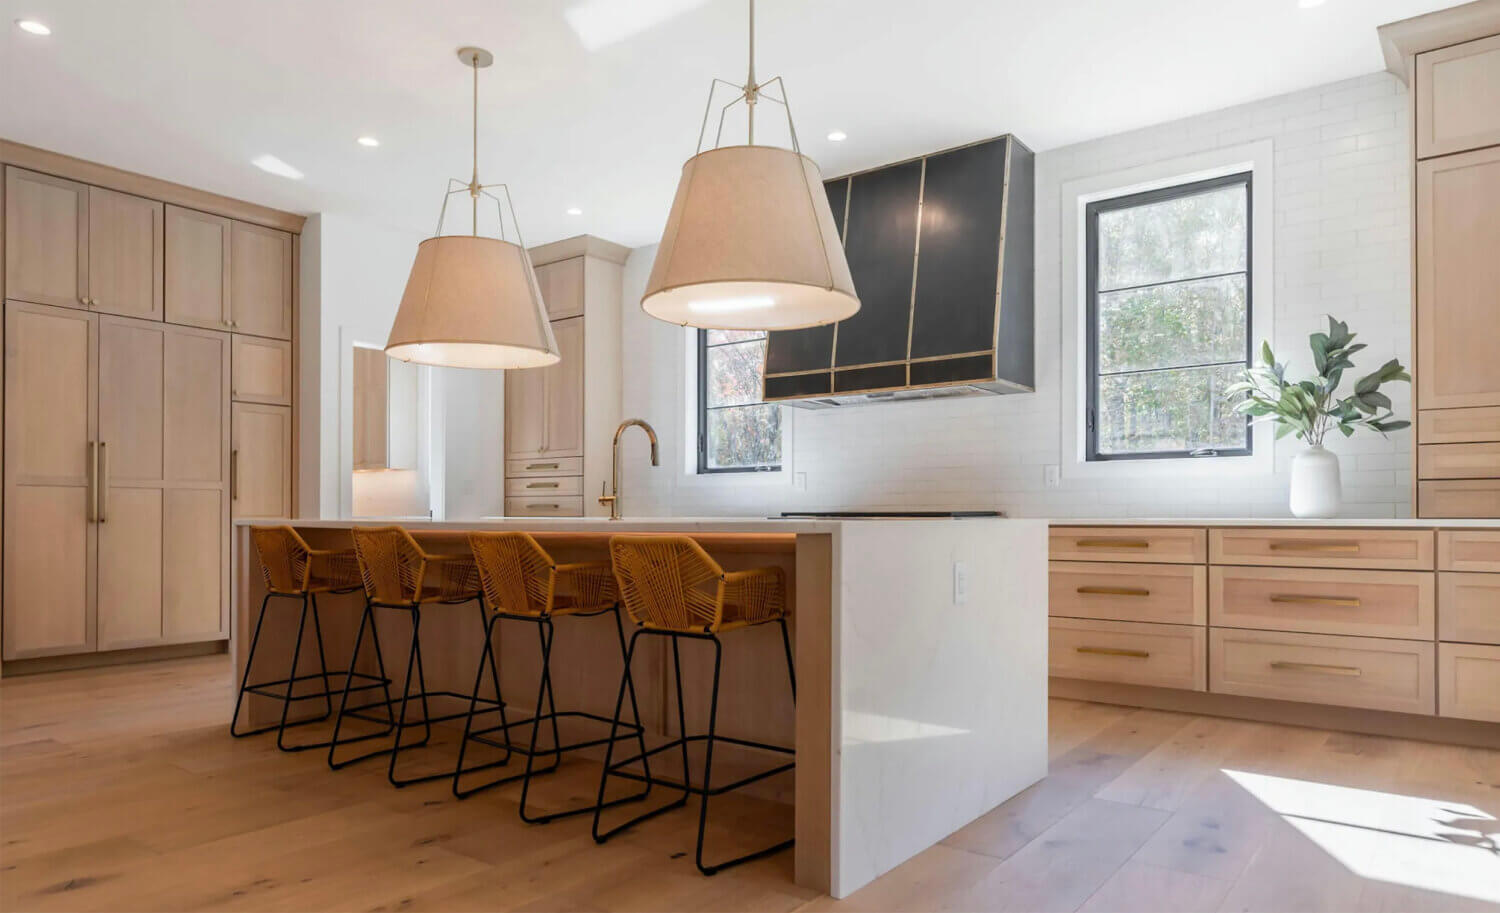 An extraordinary modern farmhouse kitchen design with qtr. sawn white oak cabinets with a light wood stain, a waterfall kitchen island and minimal wall cabinets.